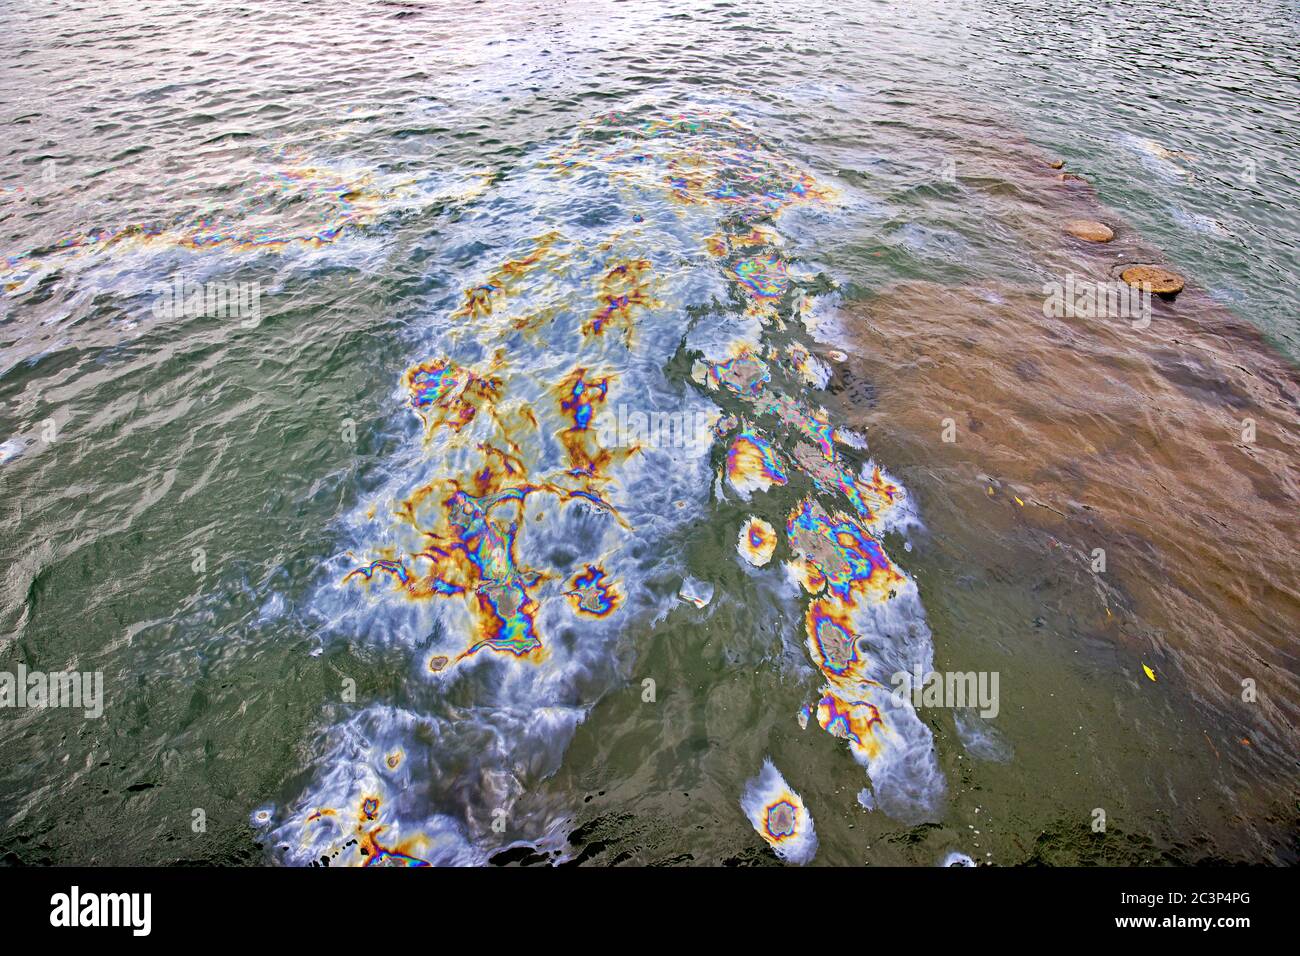 Oil spill polluting the ocean Stock Photo